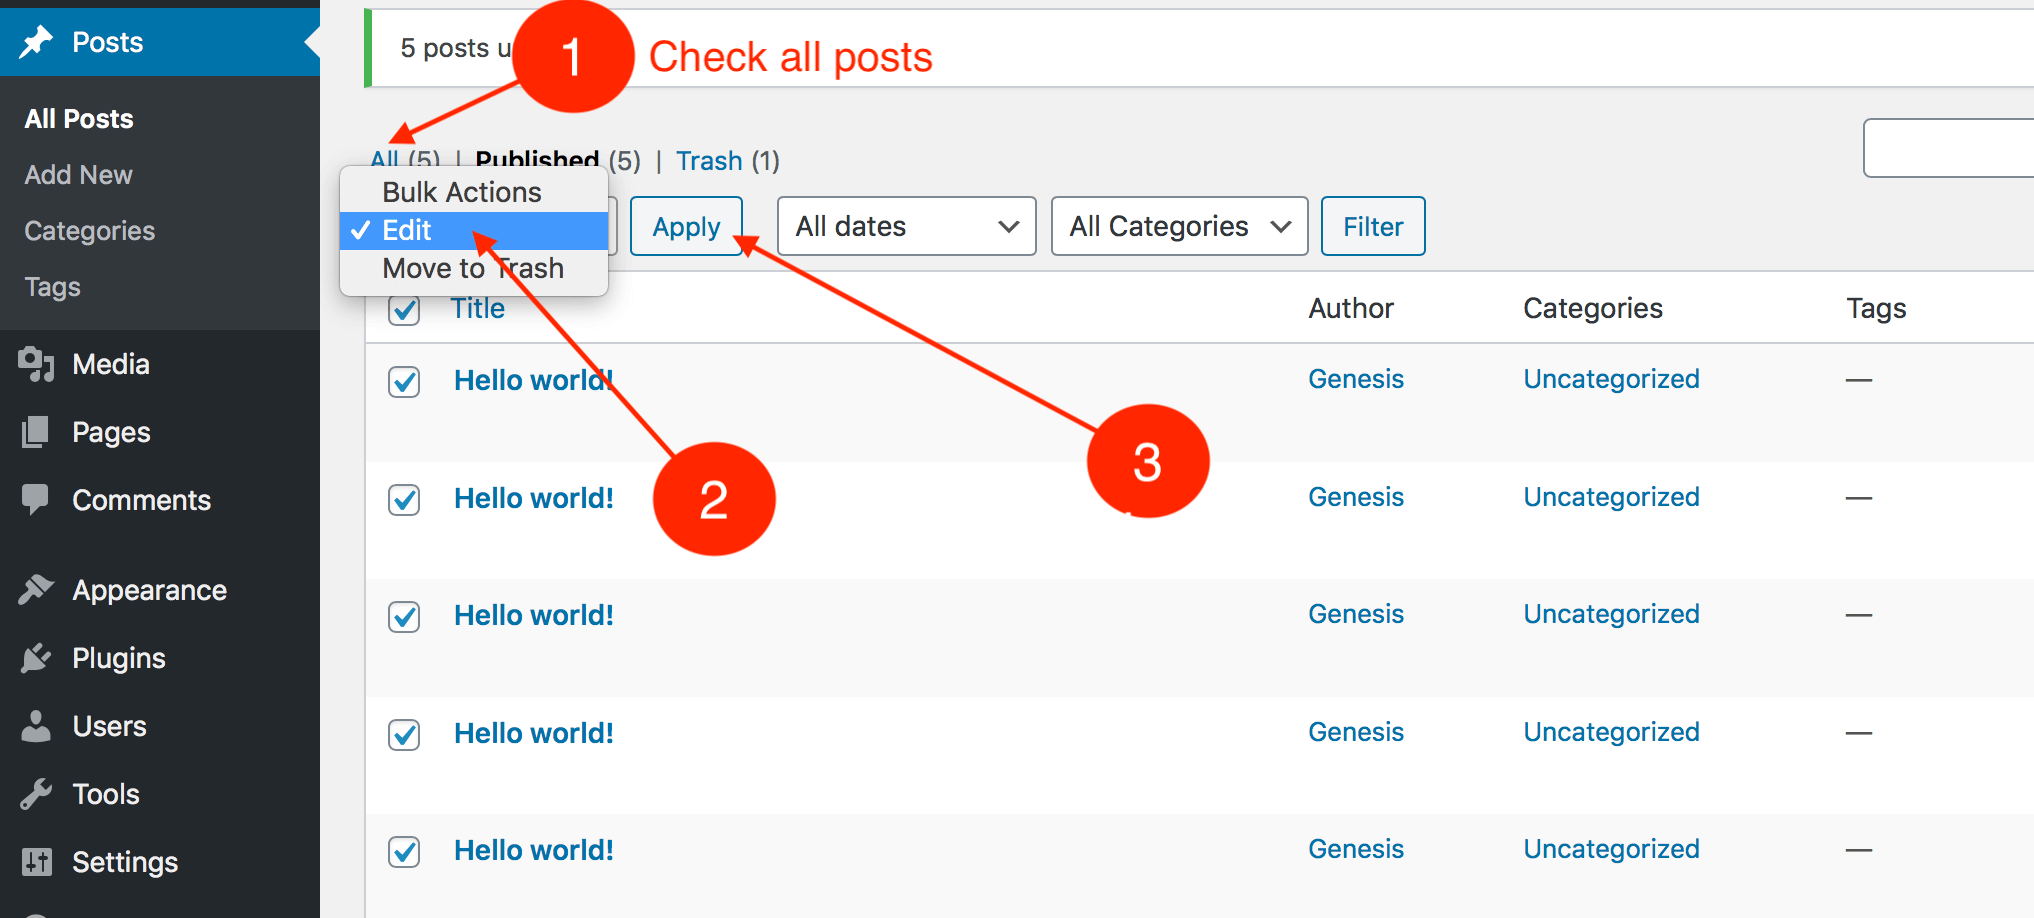 How to check all the wordpress posts